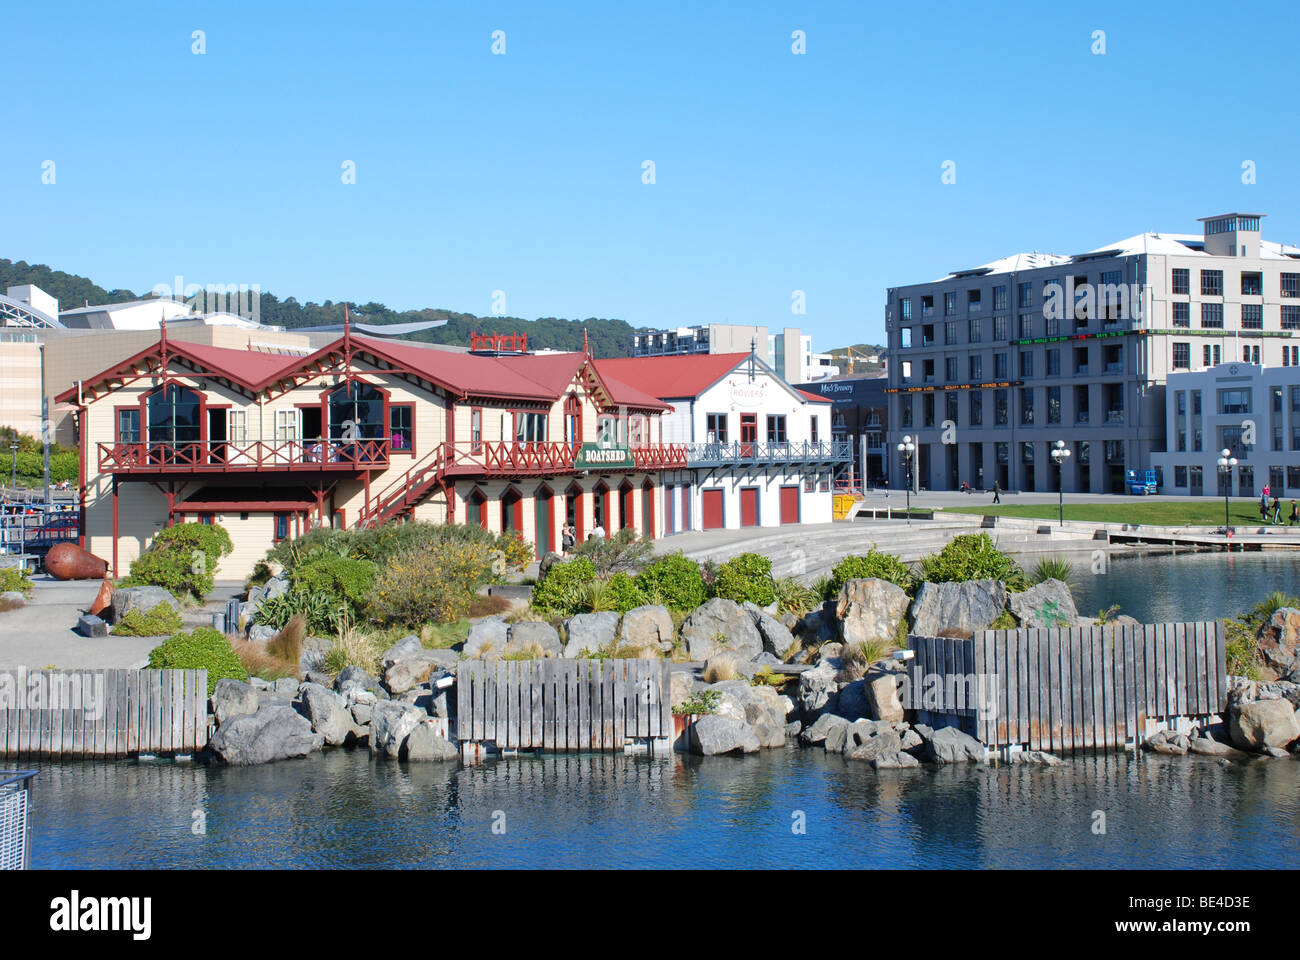 Historic Boat House with New Zealand stock exchange, the NZX Centre in background, situated on Wellington's waterfront. Stock Photo